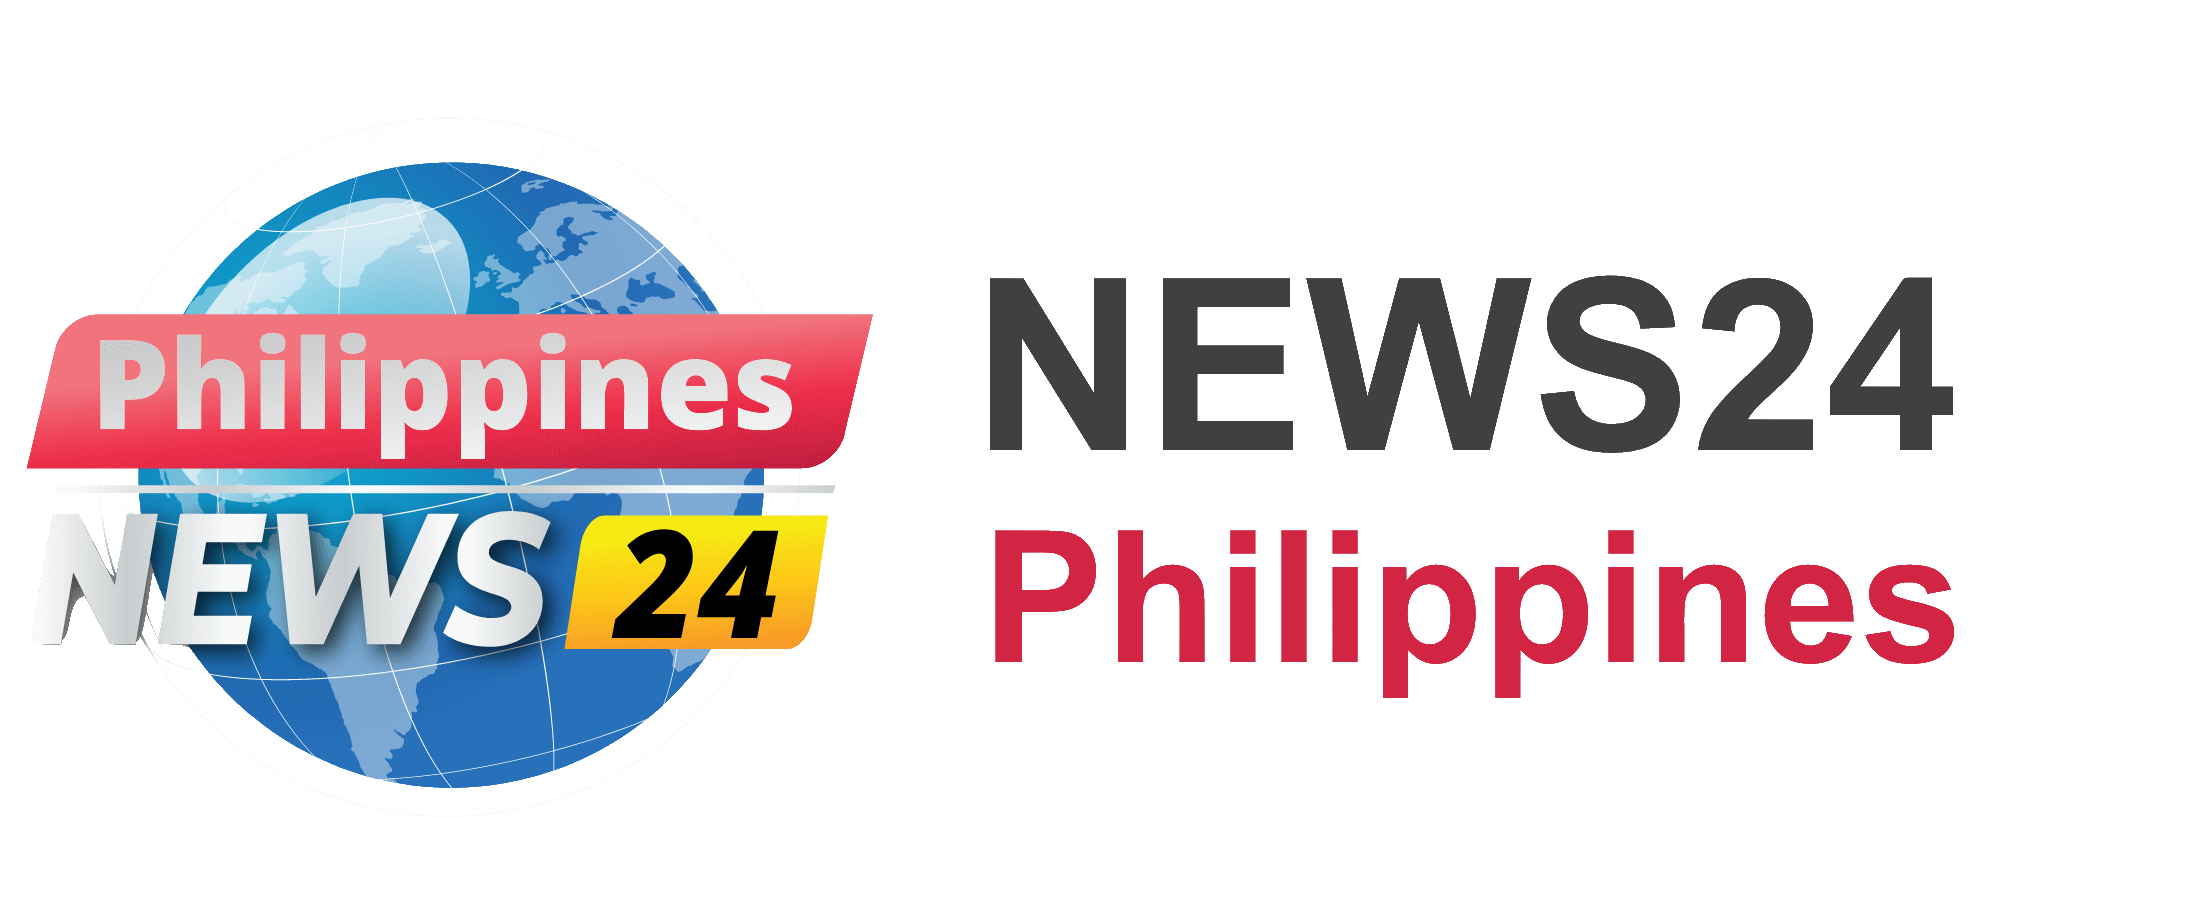 philippines_news24_2200.png